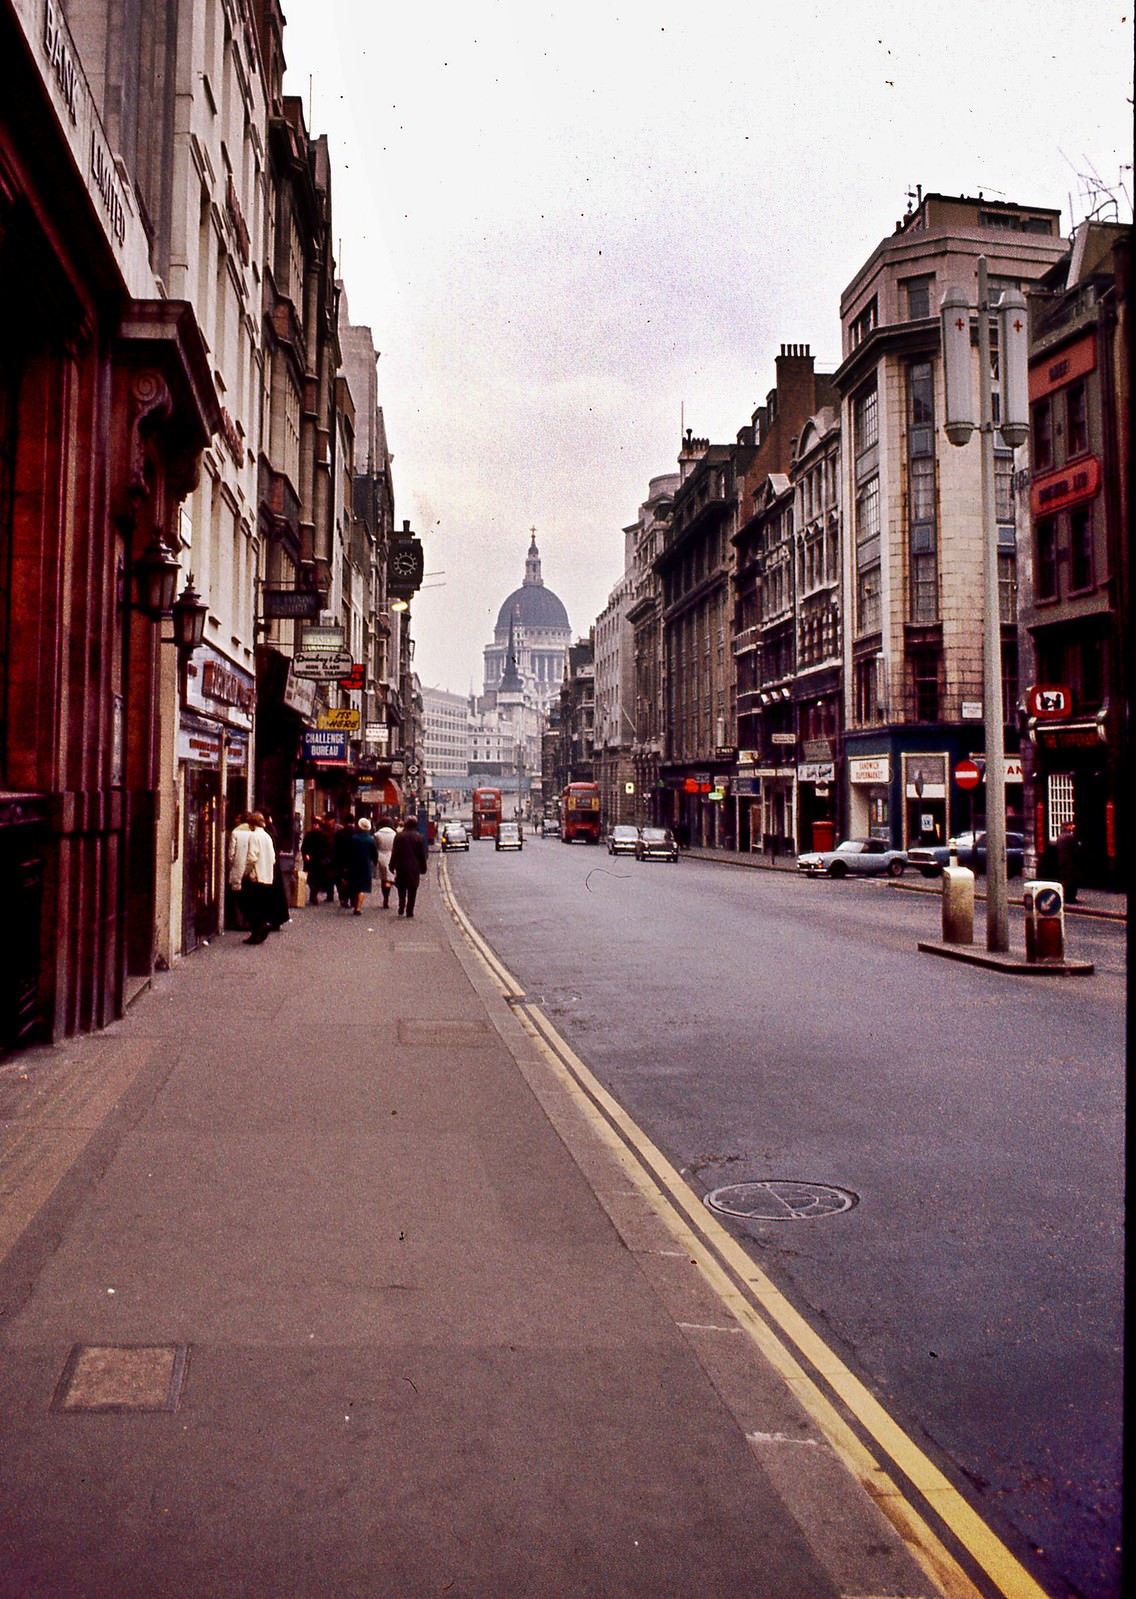 Streets of London, February 1971